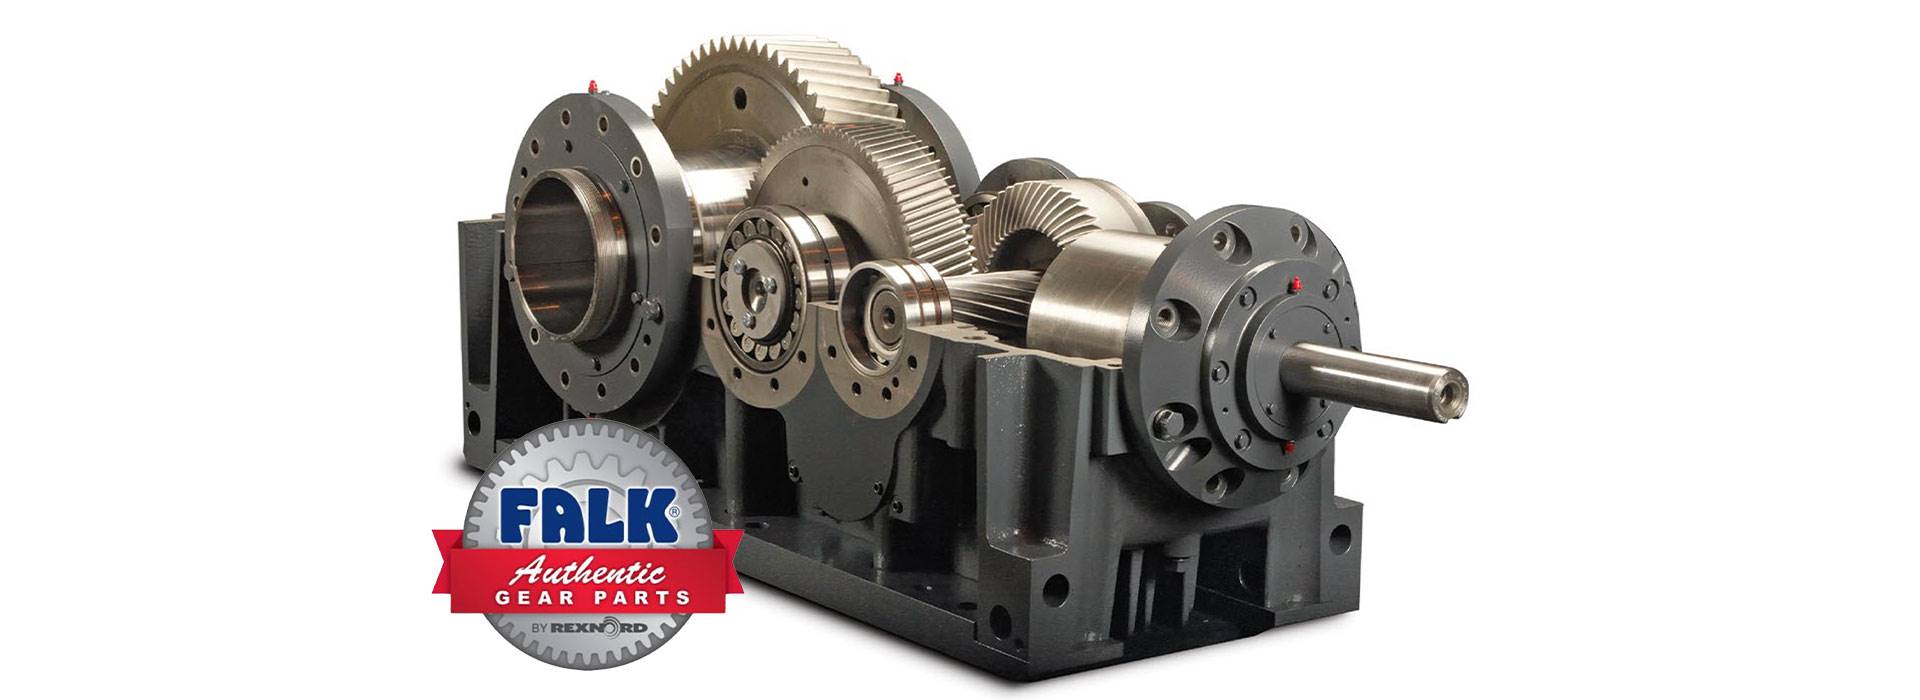 Falk Gearbox (Rexnord) worm gear and shaft mount